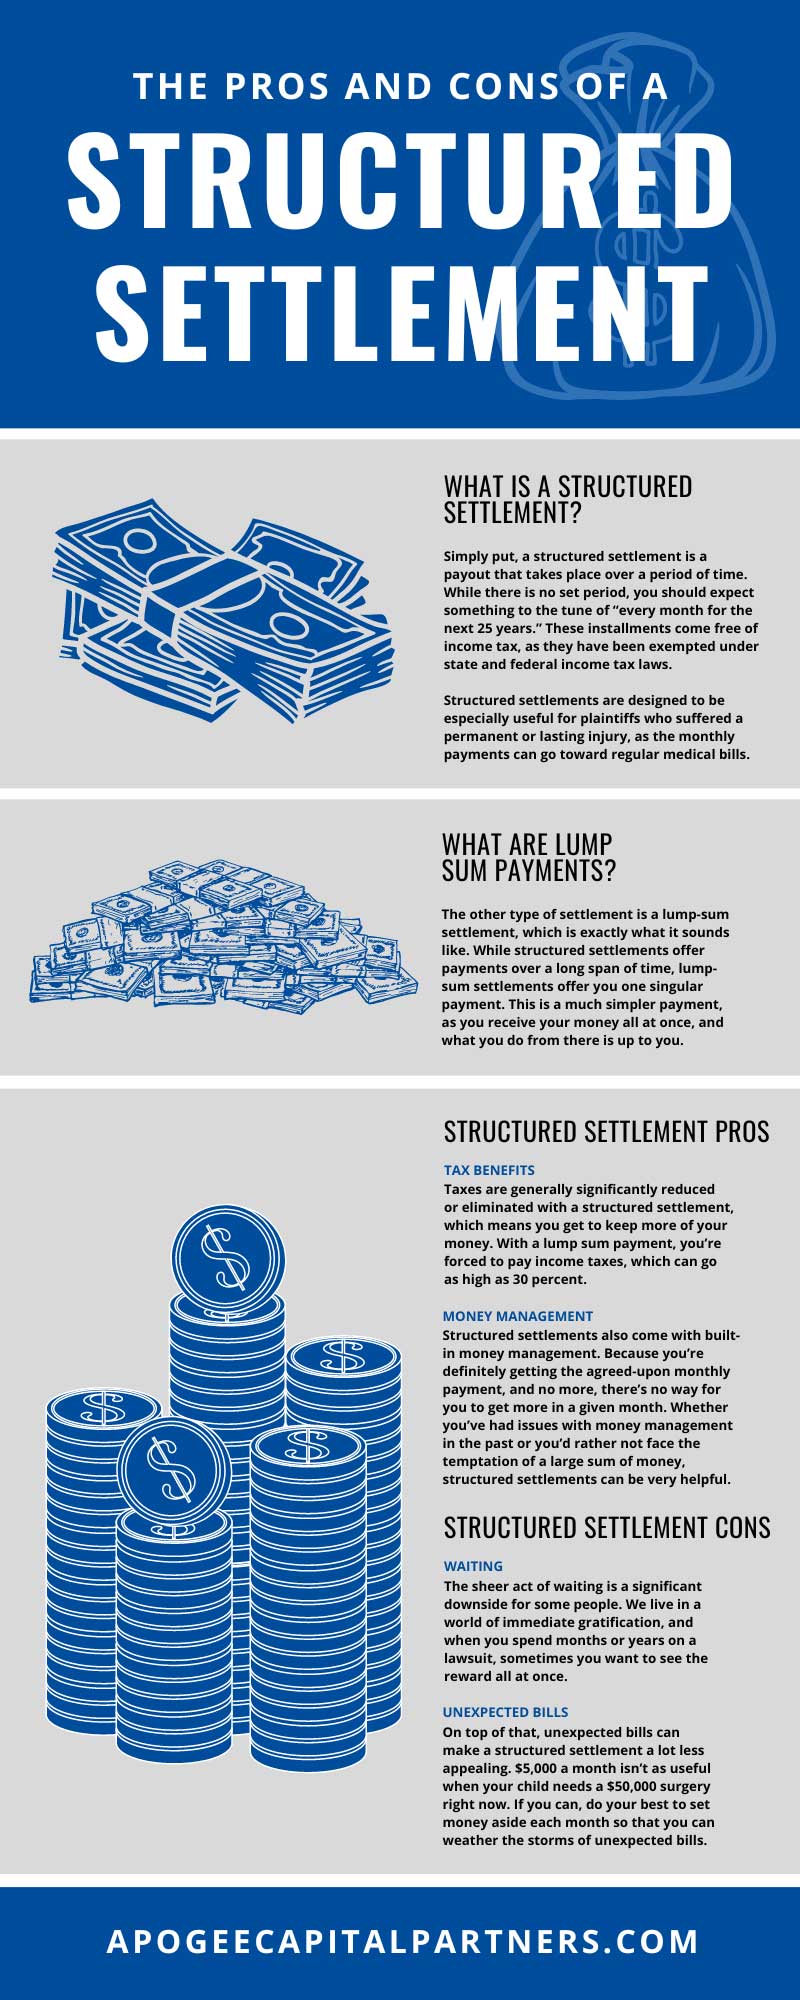 The Pros and Cons of a Structured Settlement